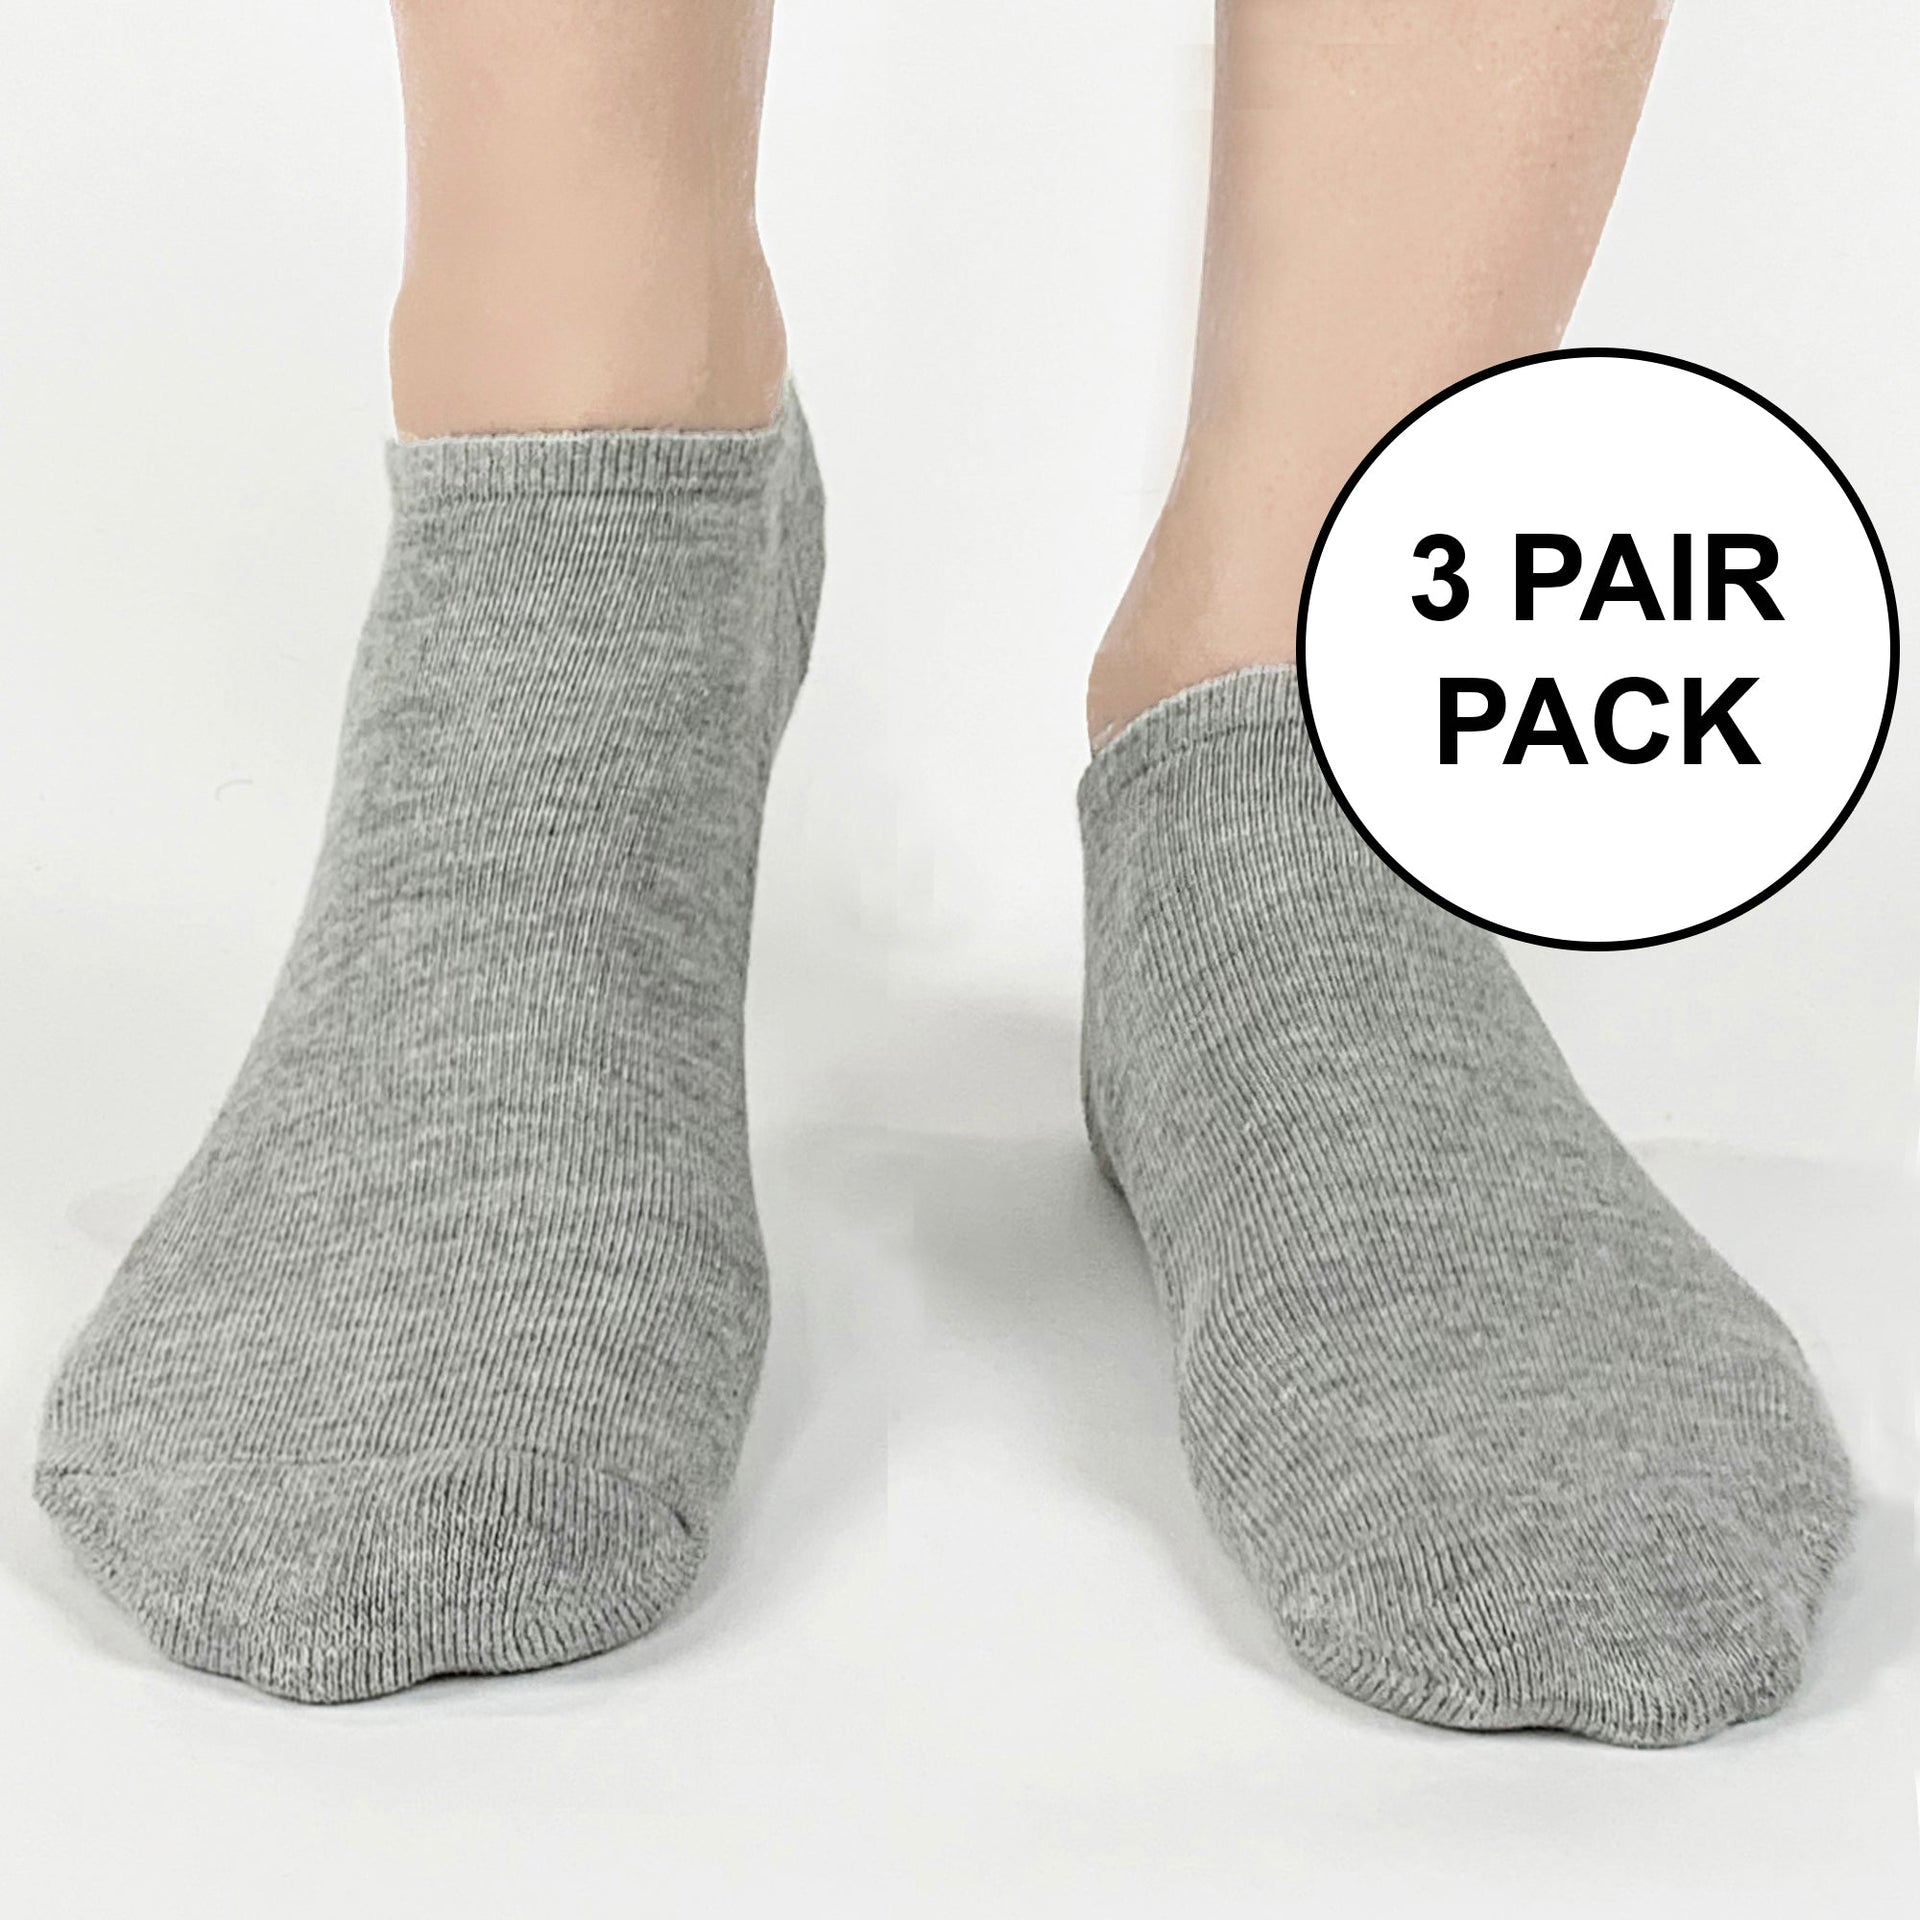 Heather gray cotton no show socks sold as a three pair pack in same size and color.